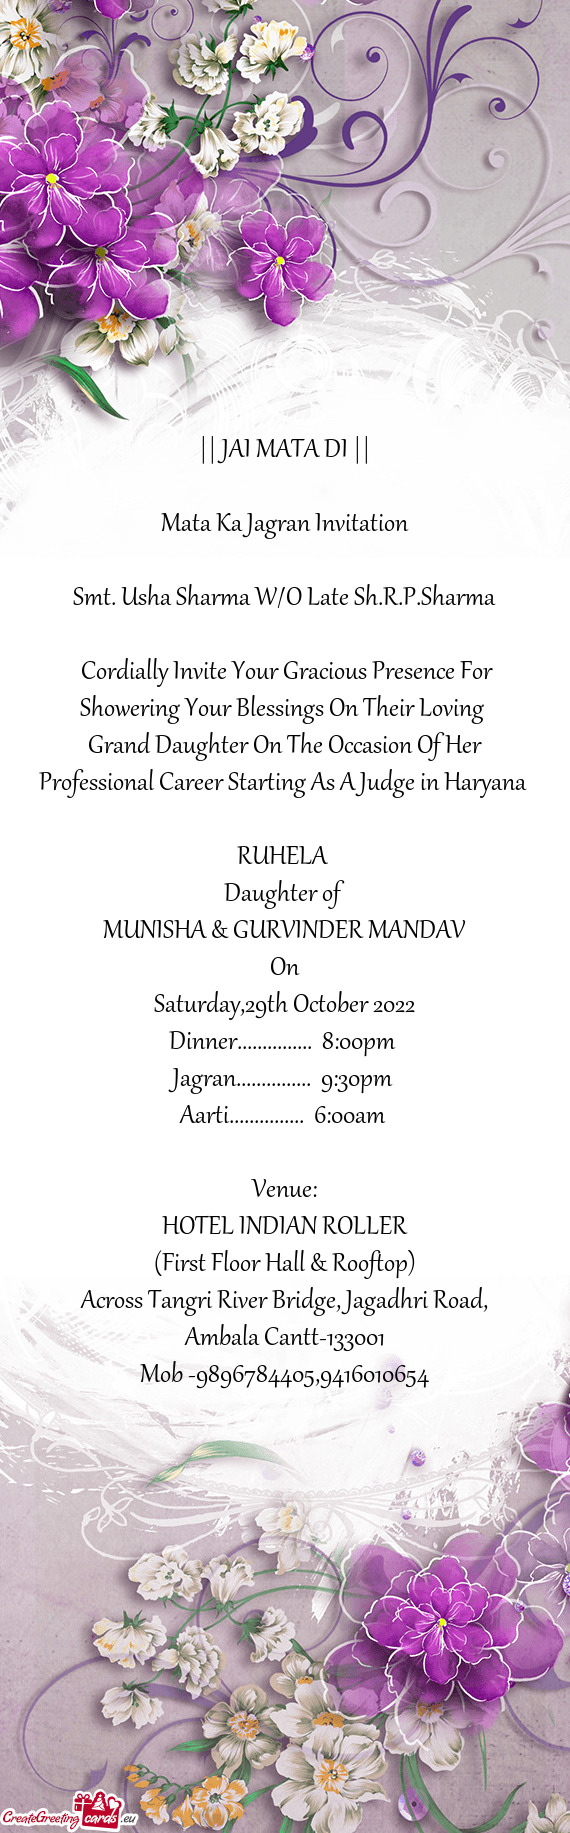 Cordially Invite Your Gracious Presence For Showering Your Blessings On Their Loving